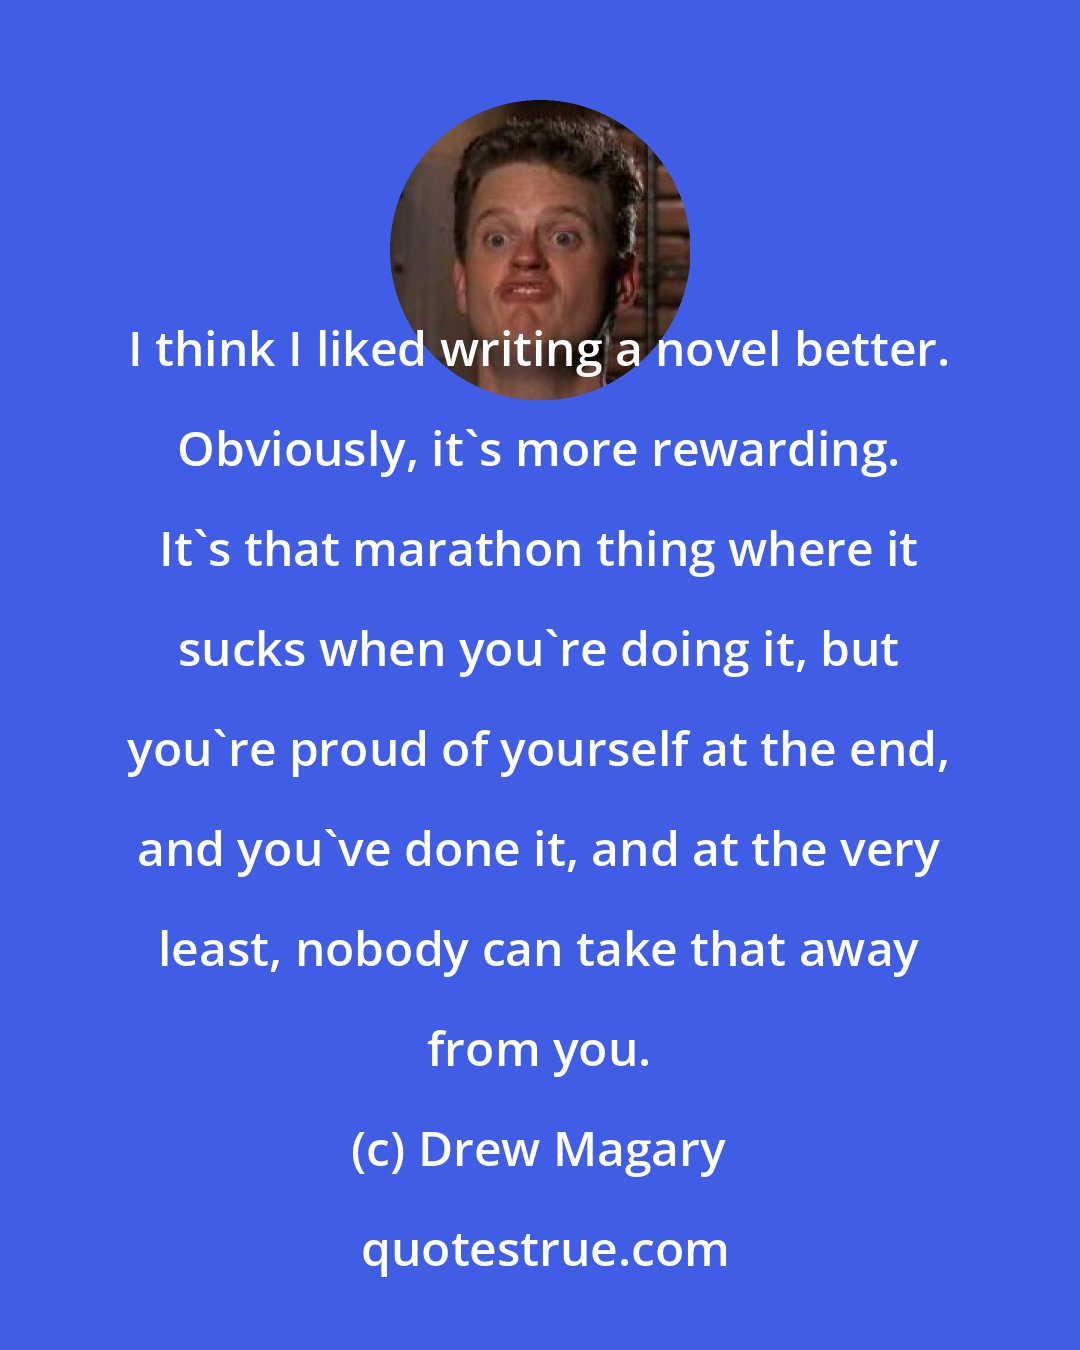 Drew Magary: I think I liked writing a novel better. Obviously, it's more rewarding. It's that marathon thing where it sucks when you're doing it, but you're proud of yourself at the end, and you've done it, and at the very least, nobody can take that away from you.